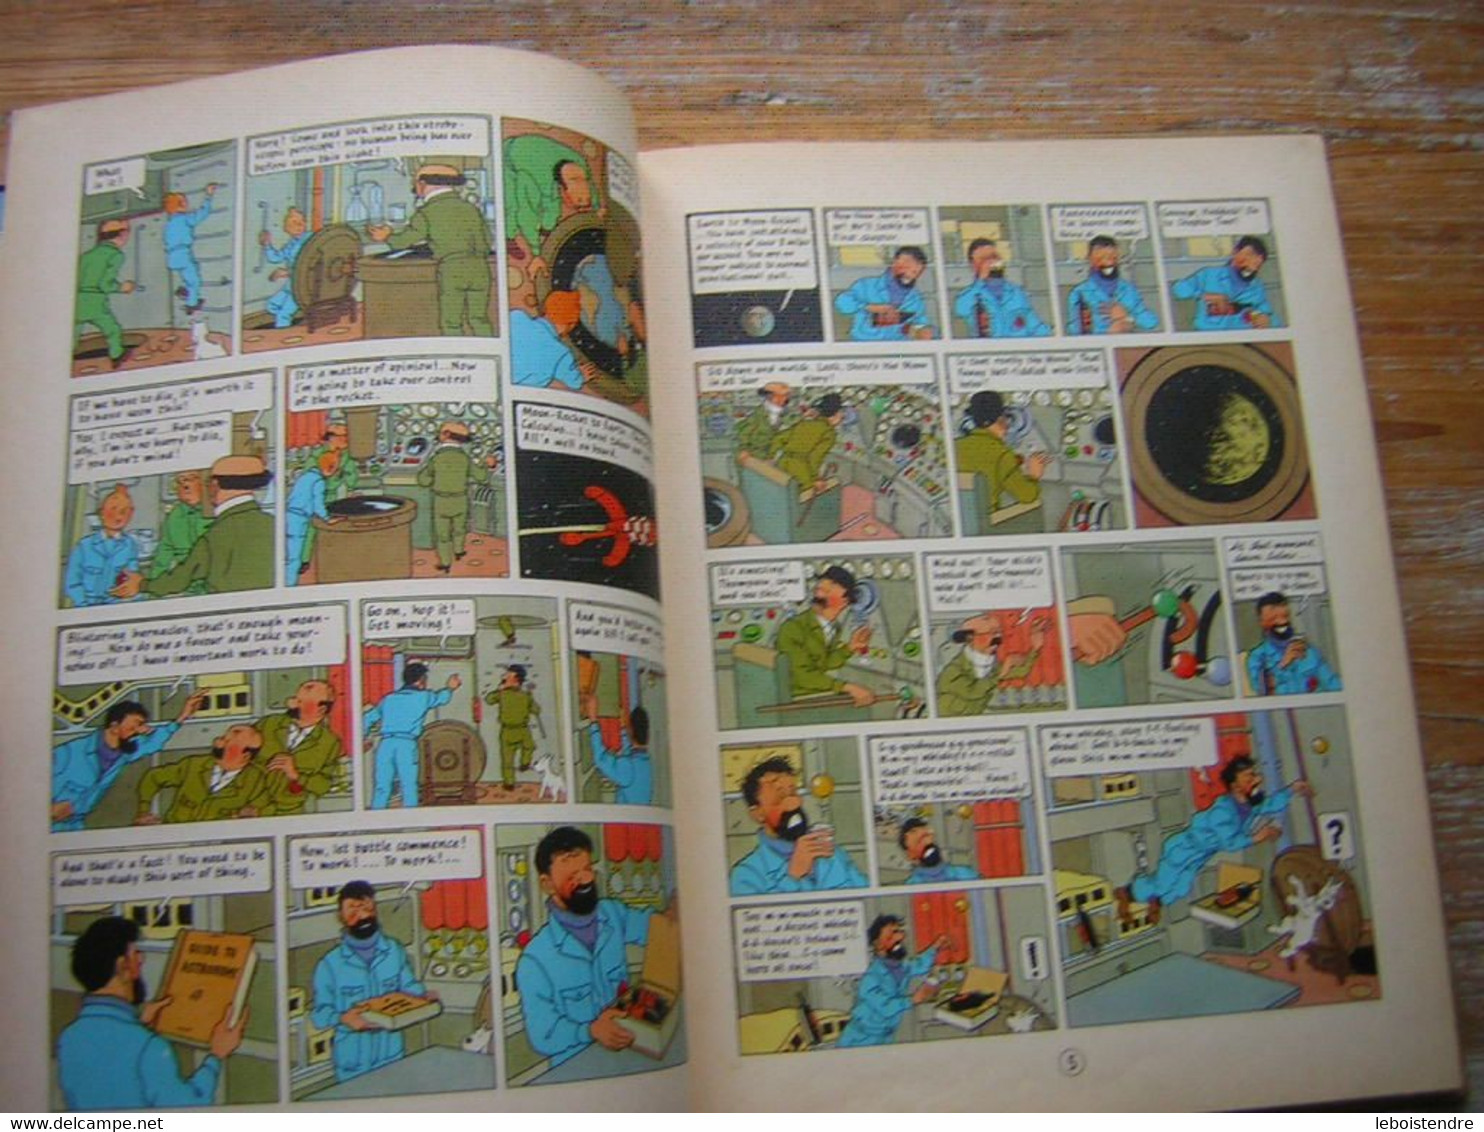 HERGE THE ADVENTURES OF TINTIN  EXPLORERS ON THE MOON  on a marché sur la lune  1er édition Anglaise 1959 METHUEN